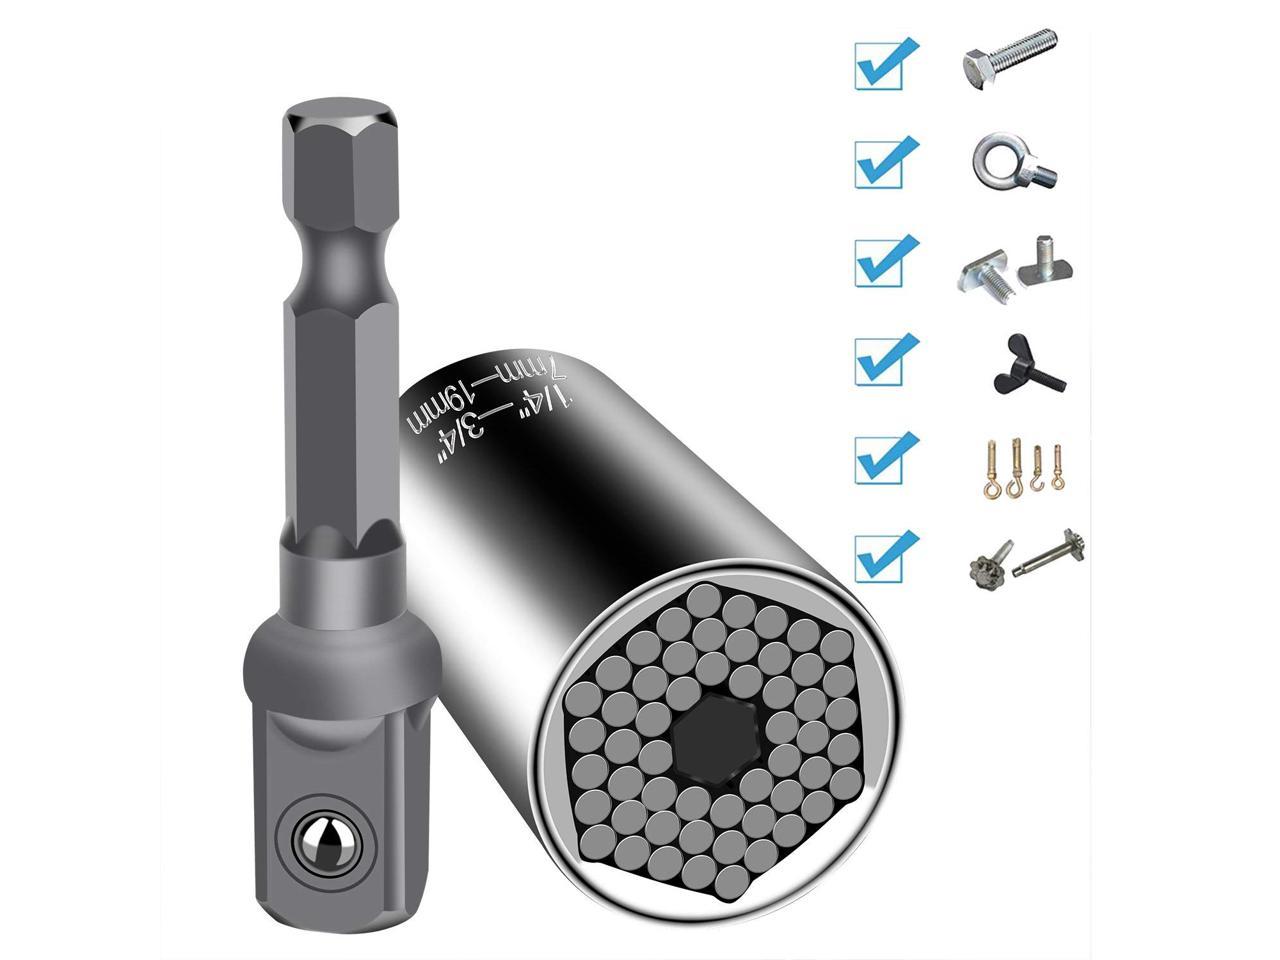 Fits Standard 1/4-3/4 Metric 7mm-19mm Universal Socket Socket Wrench Set with Ratchet Wrench Power Drill Adapter Christmas Xmas Tools Gift for Men 